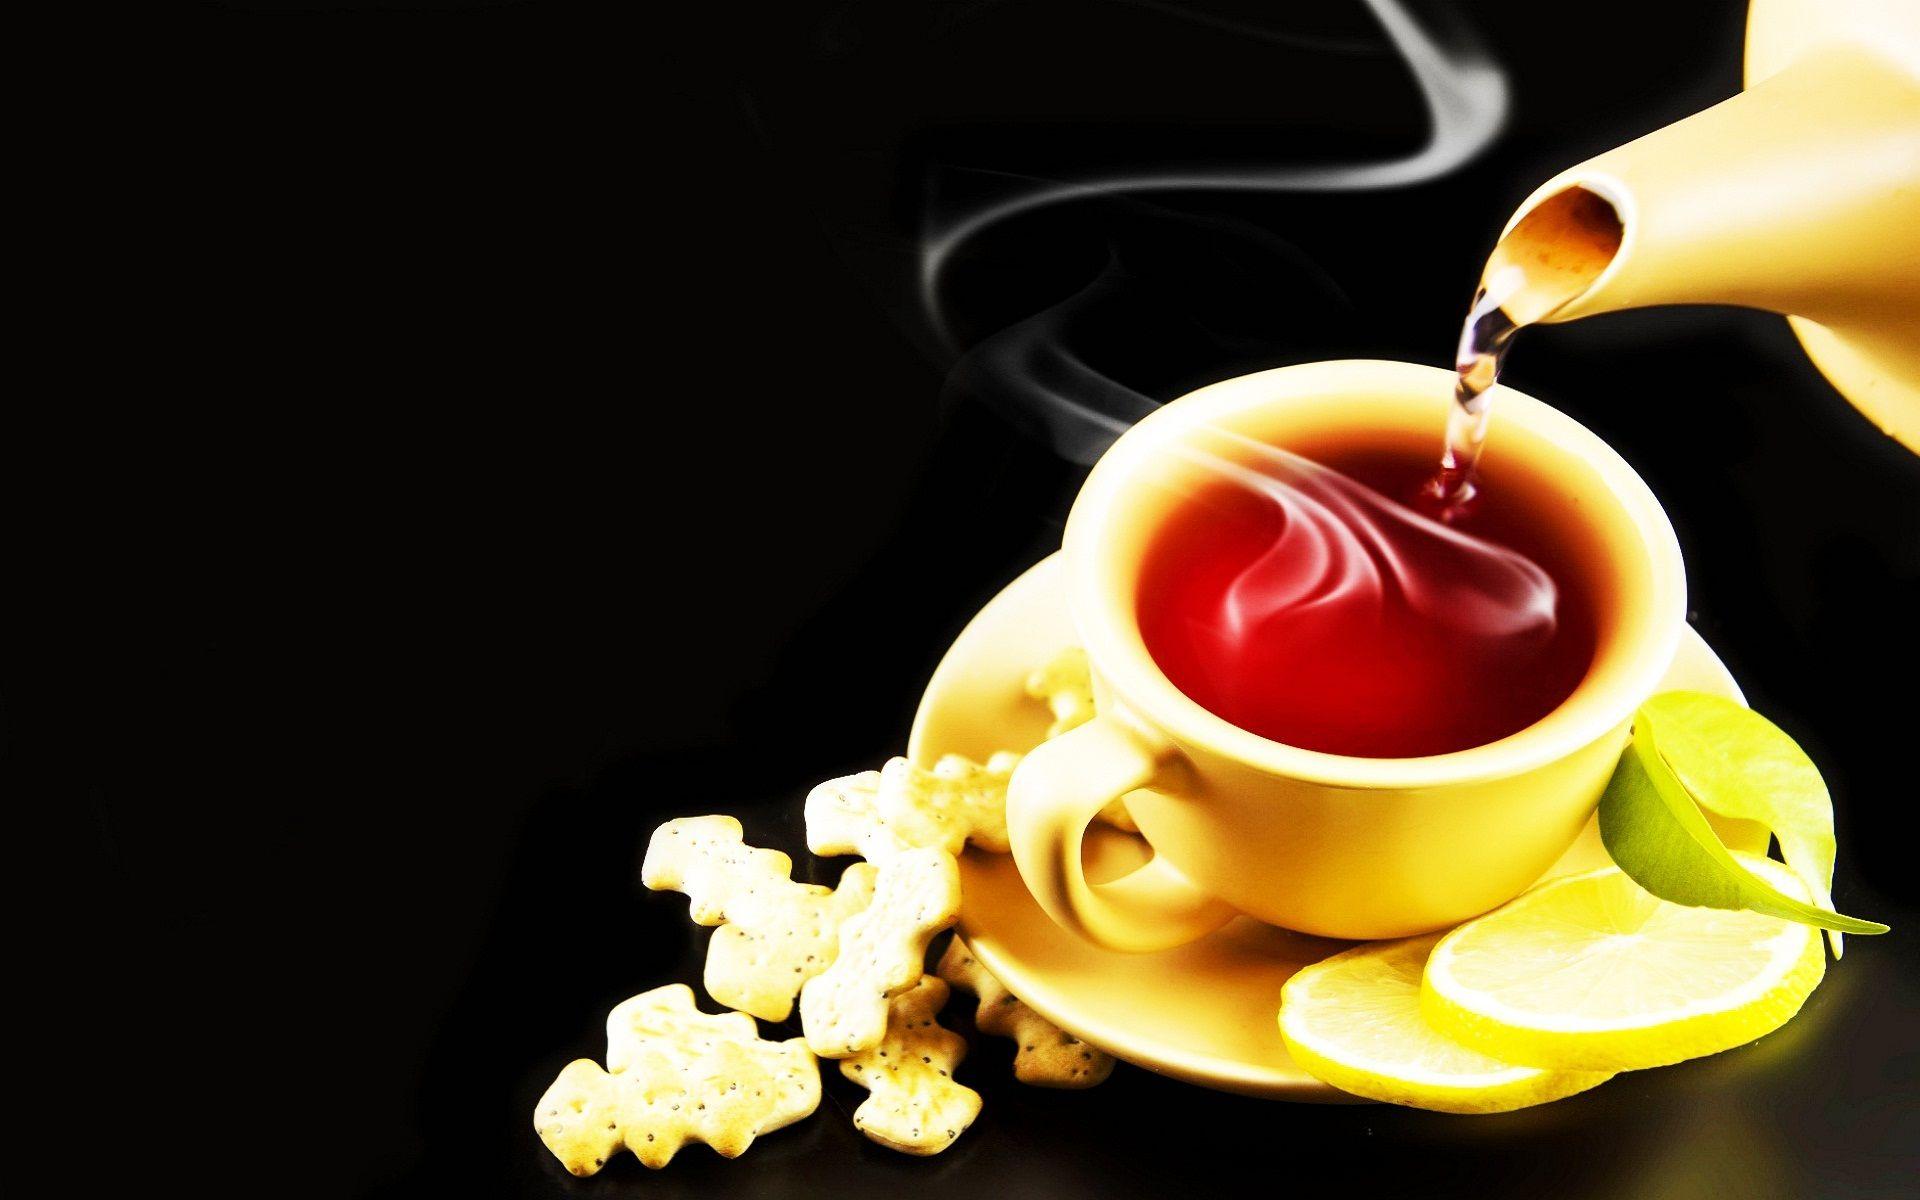 Hot tea for cool morning wishes HD wallpaperNew HD wallpaper